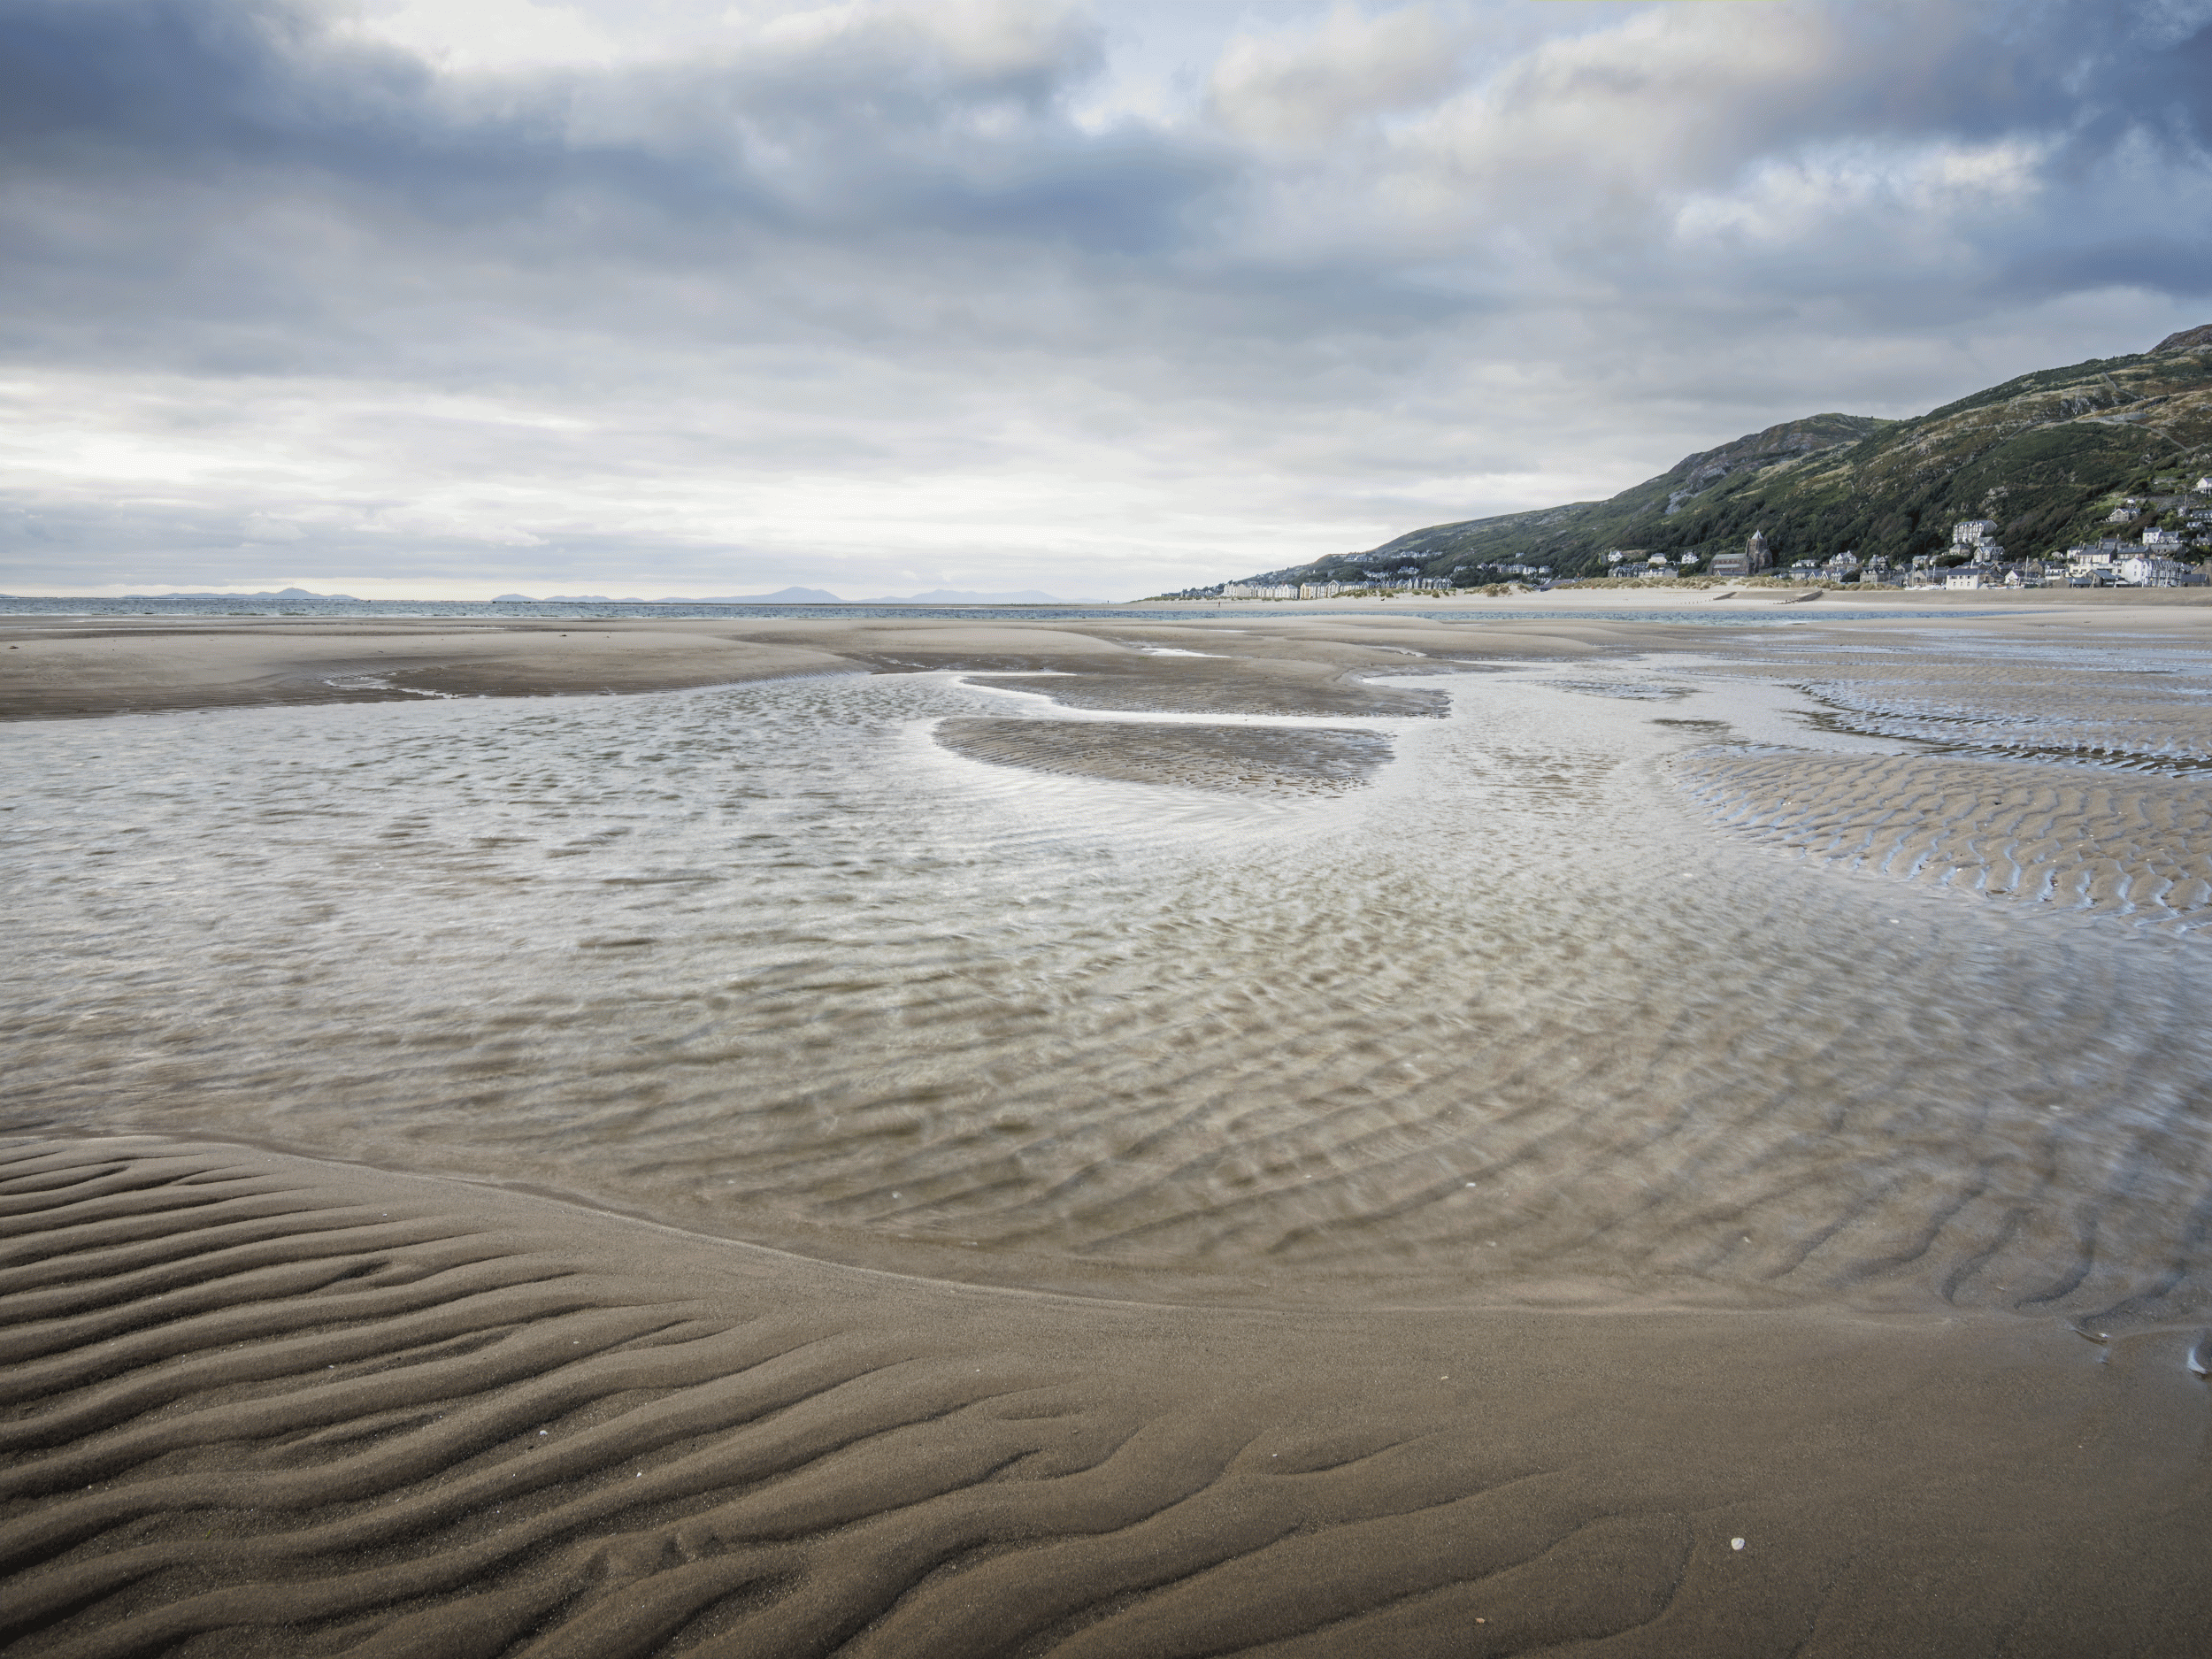 The beach near Barmouth, north Wales, where the boy's family and 500 members of Birmingham's Yemeni and Somali community had visited for a holiday trip